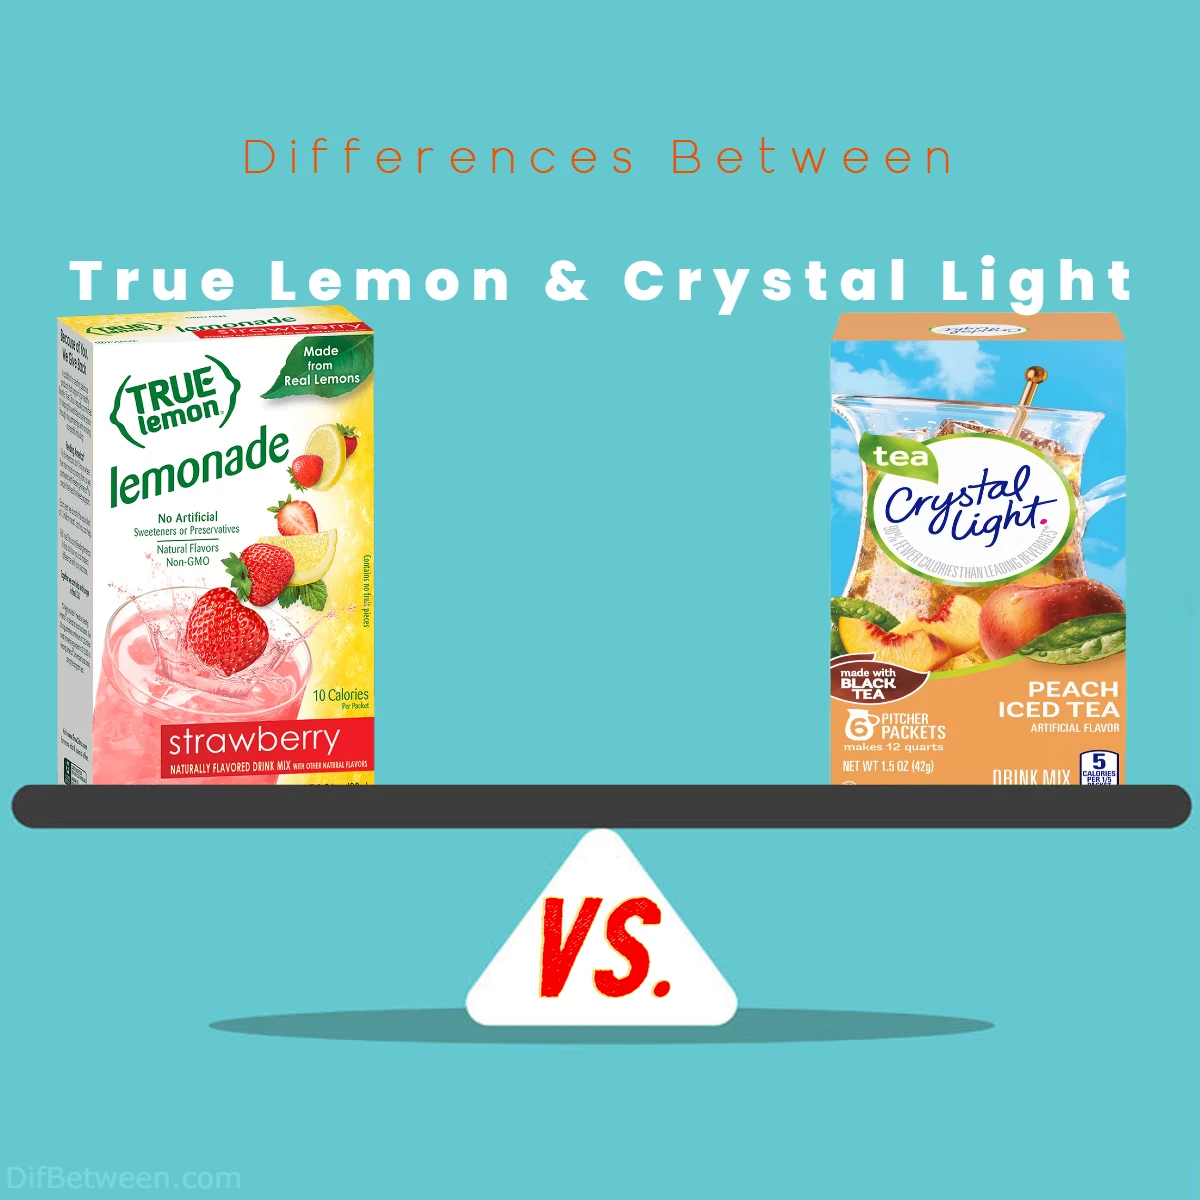 Differences Between Crystal Light and True Lemon